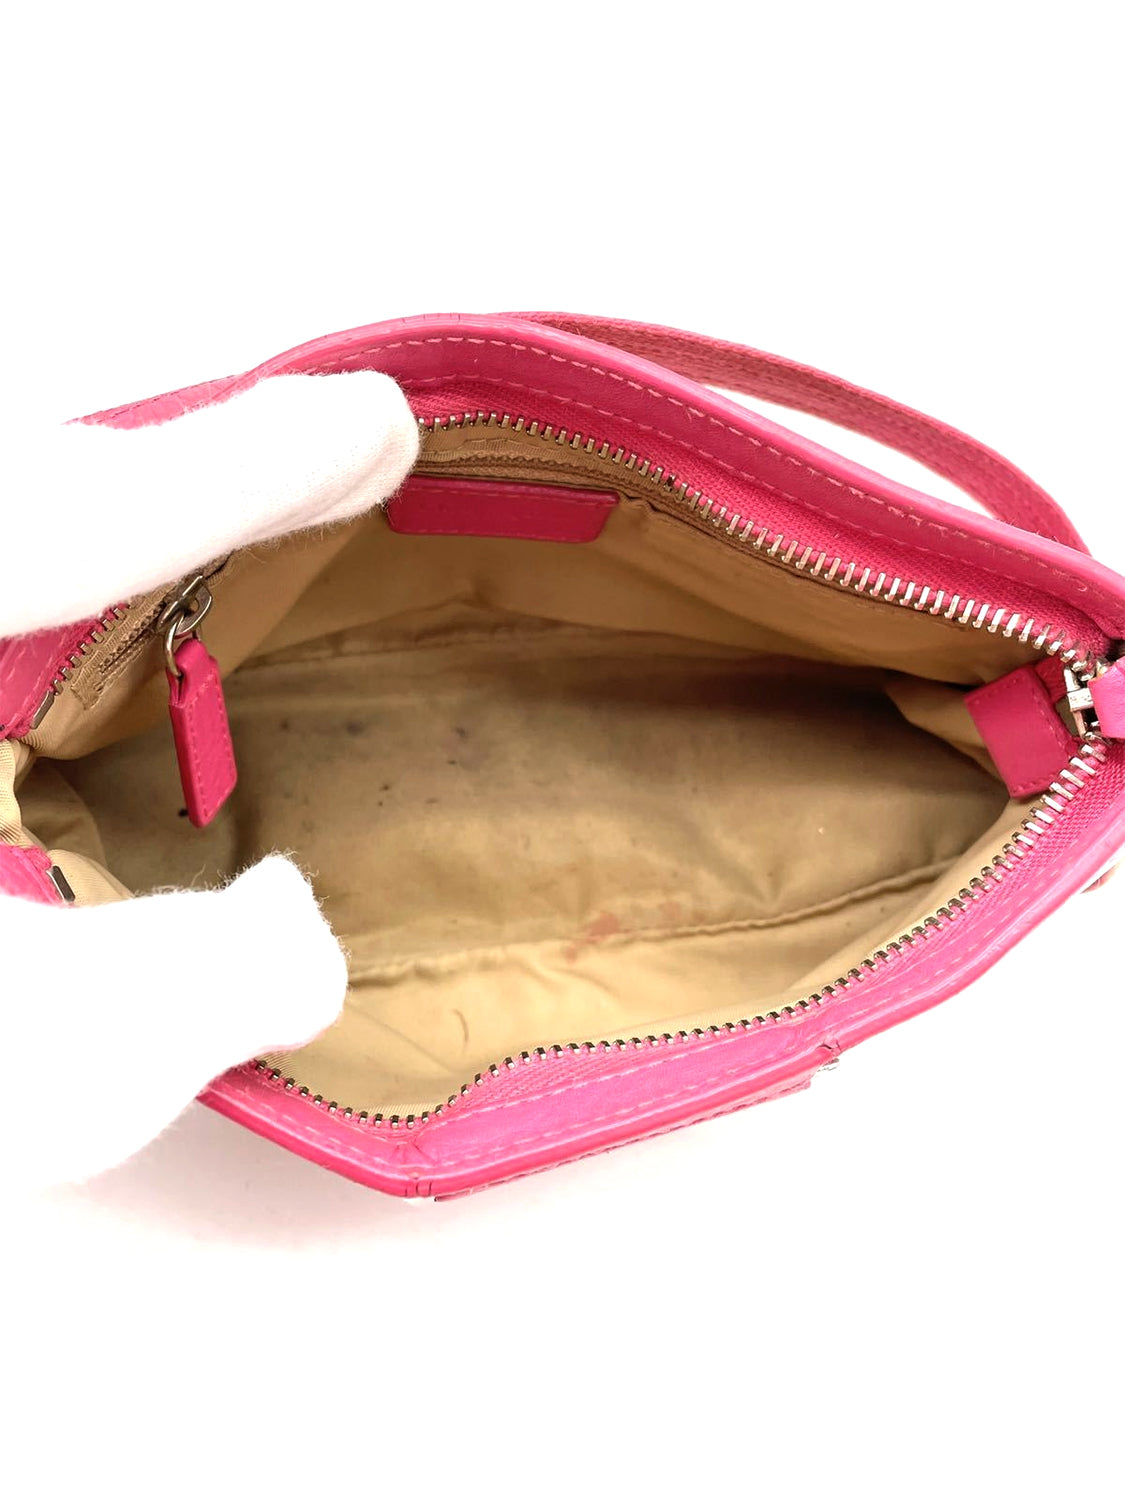 Dior, Bags, Vintage Dior Romantique Girly Pink Leather Bag